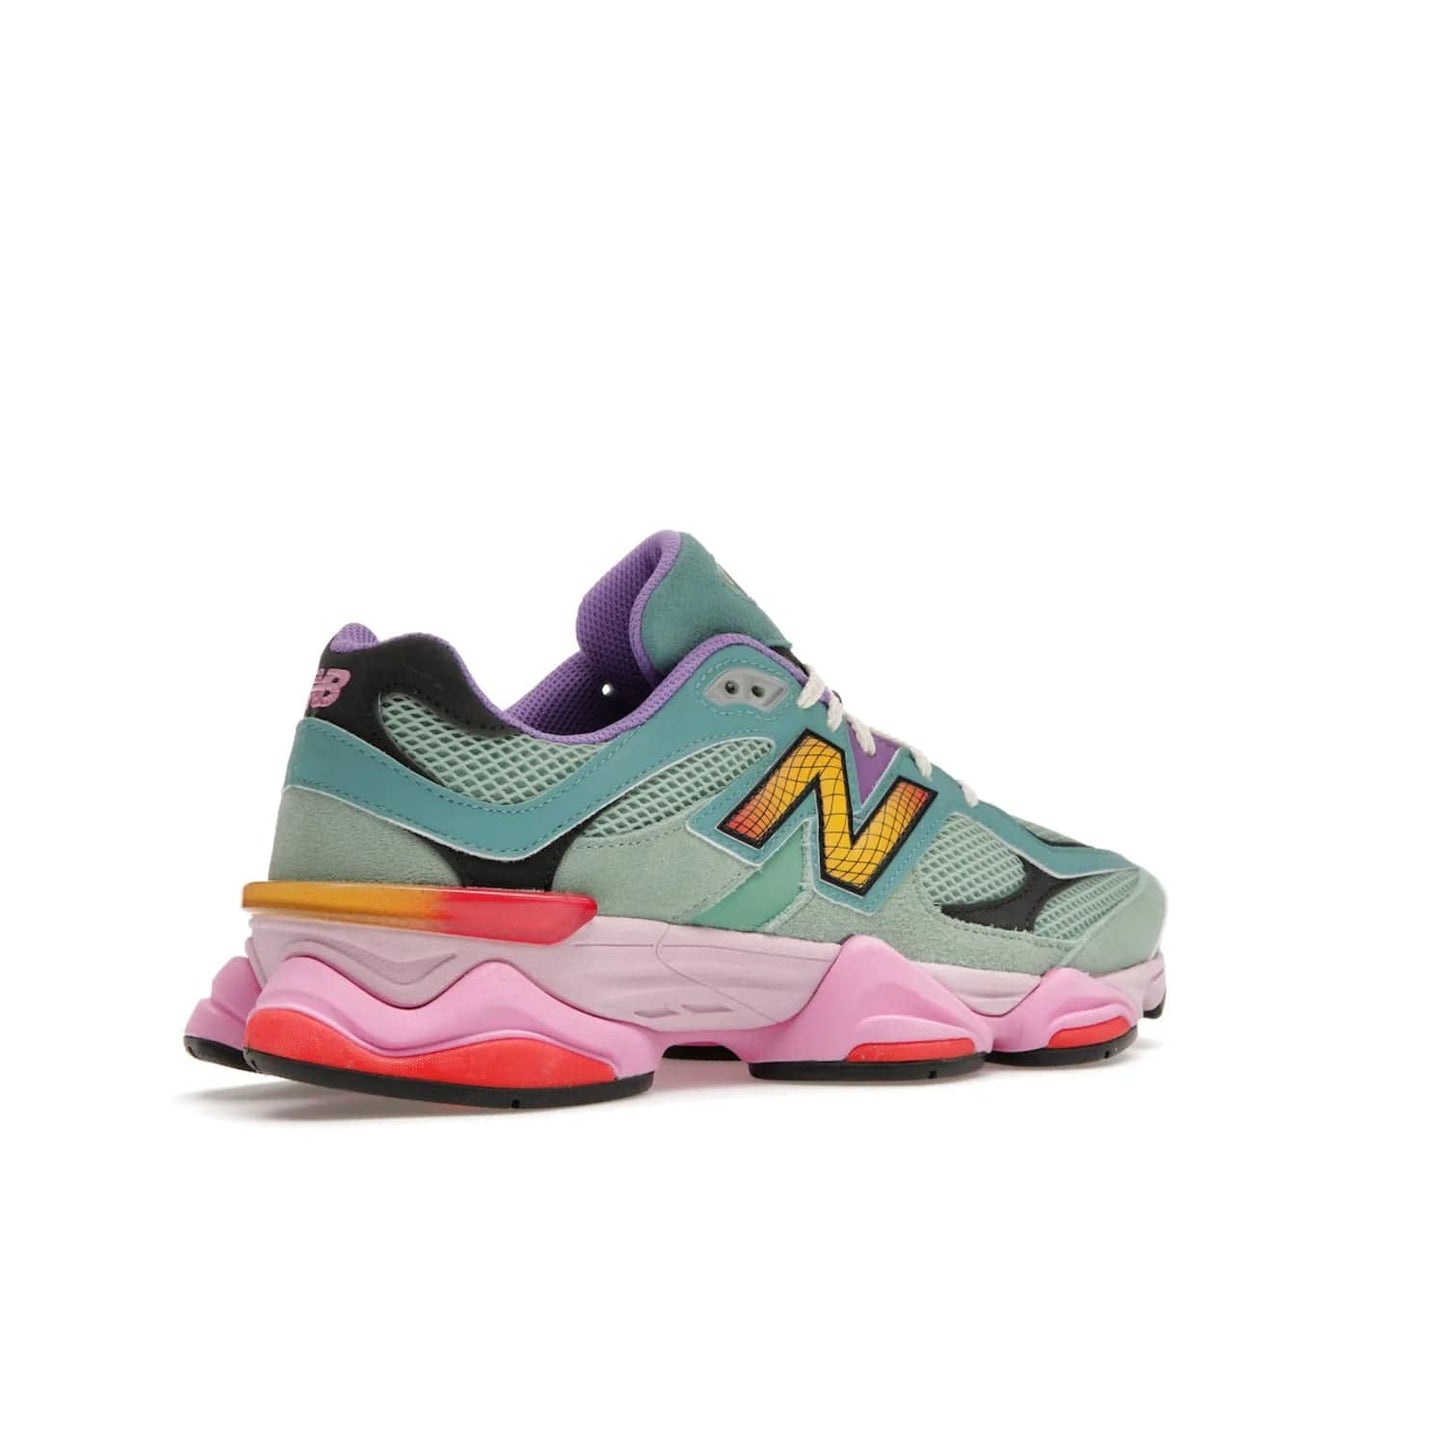 New Balance 9060 Warped Multi-Color - Image 34 - Only at www.BallersClubKickz.com - Enhance your style with the new New Balance 9060 Warped Multi-Colour! Suede overlays, mesh base layer and ABZORB midsole provide comfortable cushioning, while the colourful design ticks all the latest trends. Nylon laces offer an adjustable fit for maximum convenience. Debuting on March 31, 2023 - a must-have addition to your sneaker collection.